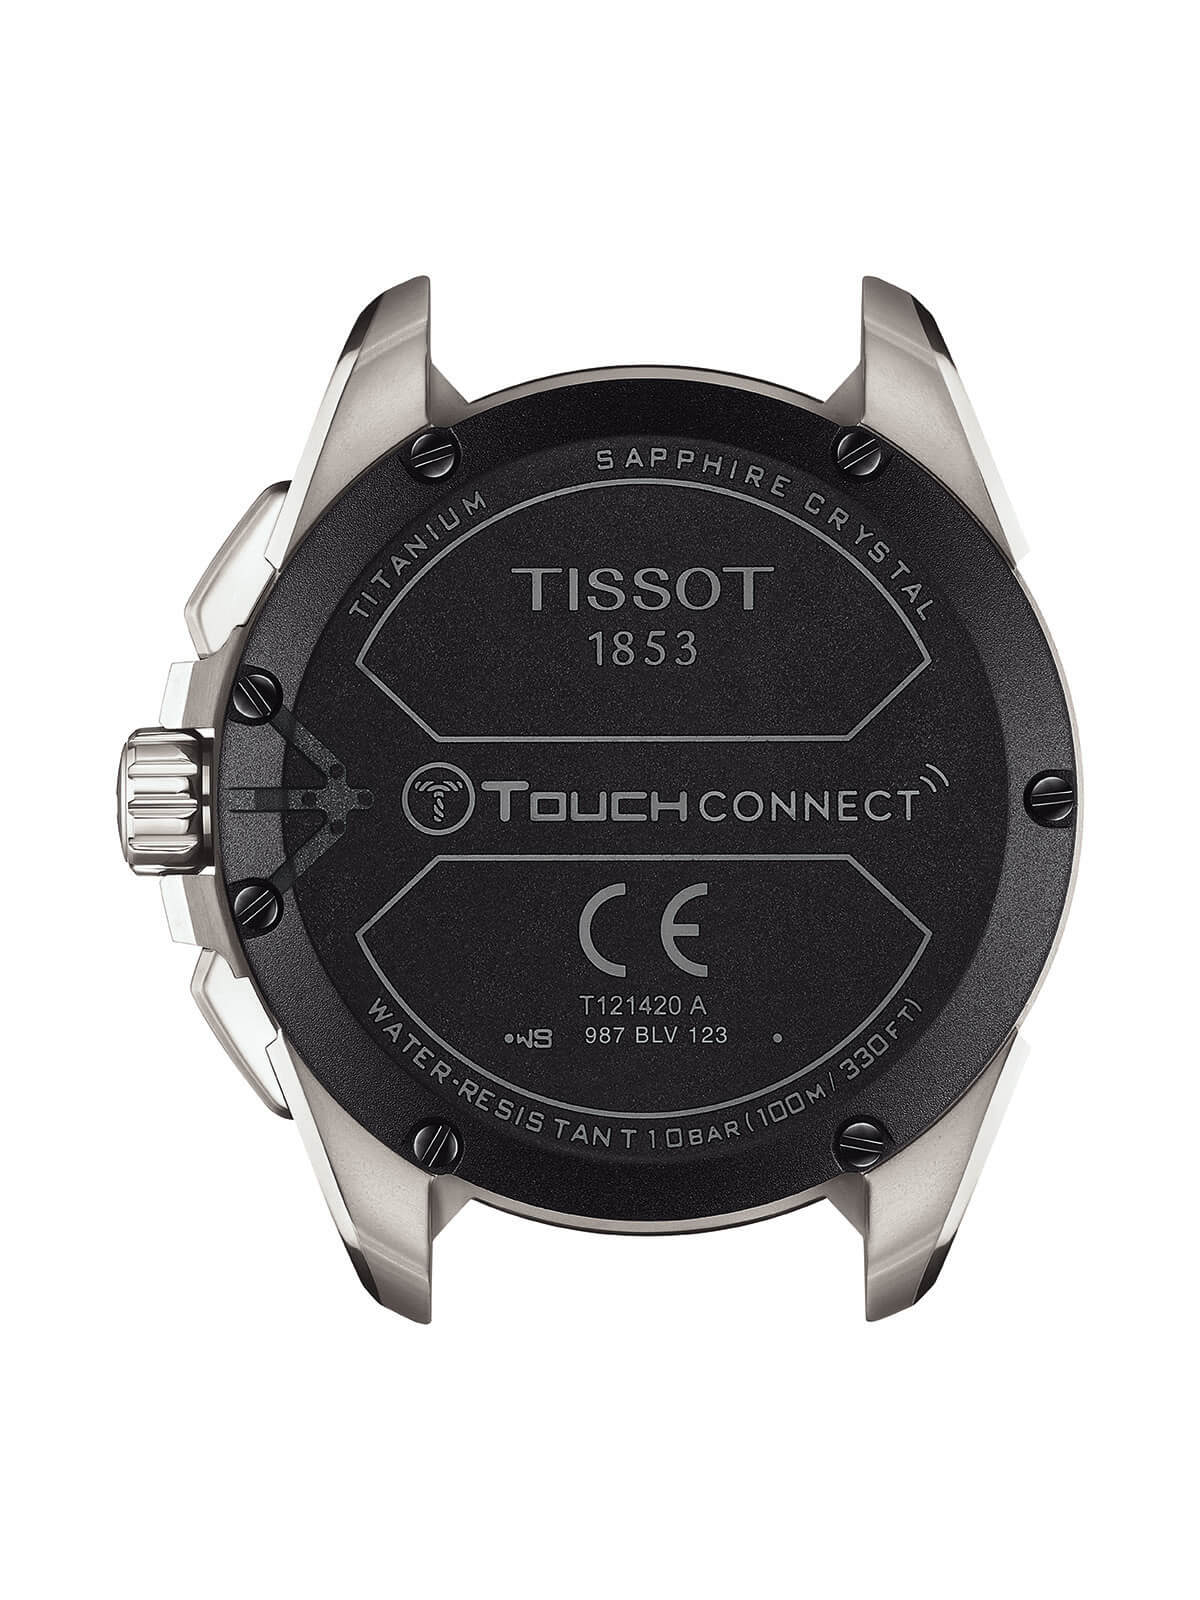 Tissot T-Touch Connected Solar Watch T121.420.44.051.00 - W.Bruford